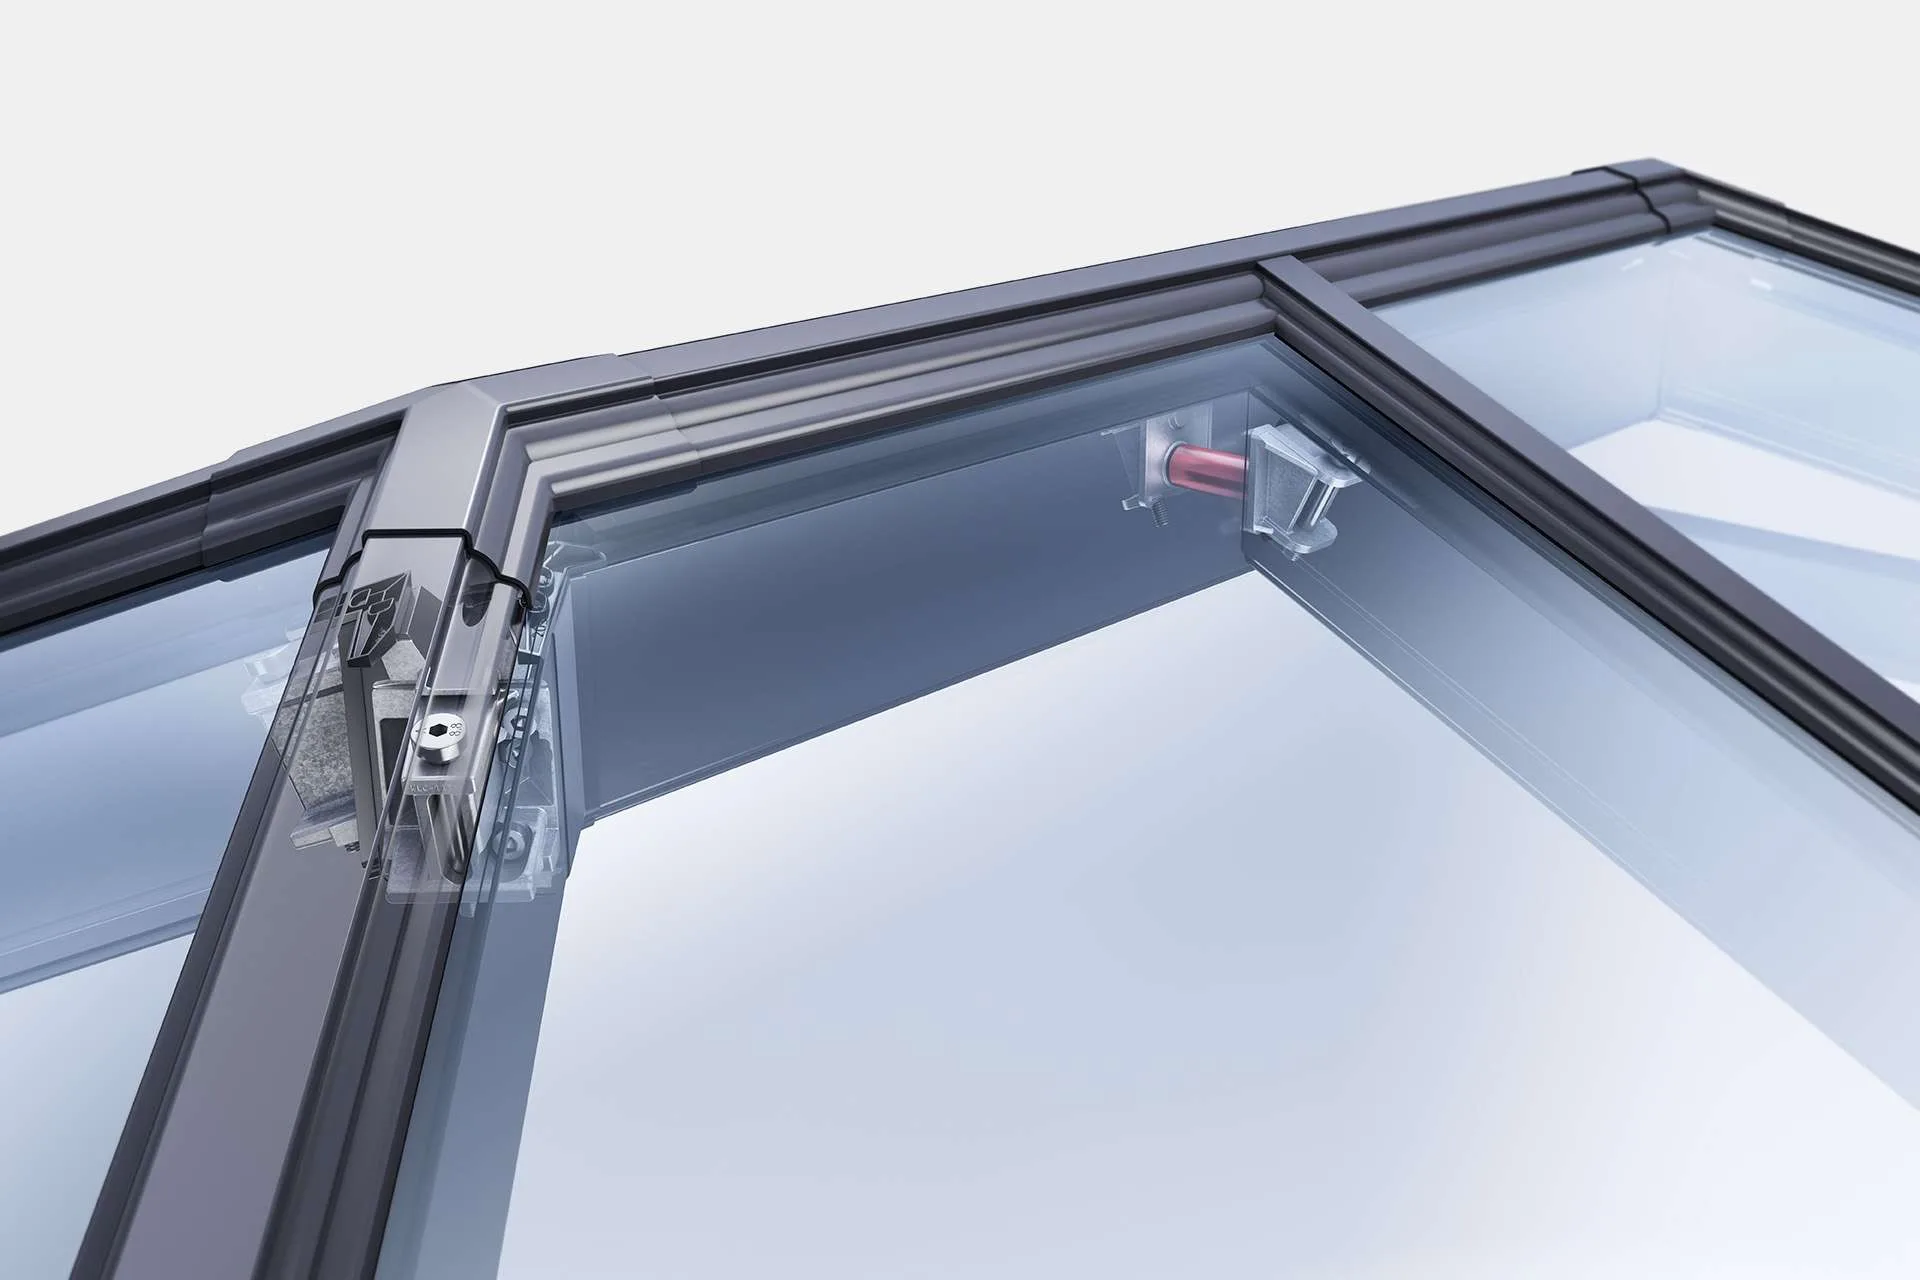 Digital illustration of a Korniche Roof Lantern with its diecast components disassembled. The detailed view showcases the precise engineering and craftsmanship that provide superior weather resistance, thermal performance, low maintenance, and a visually striking design.